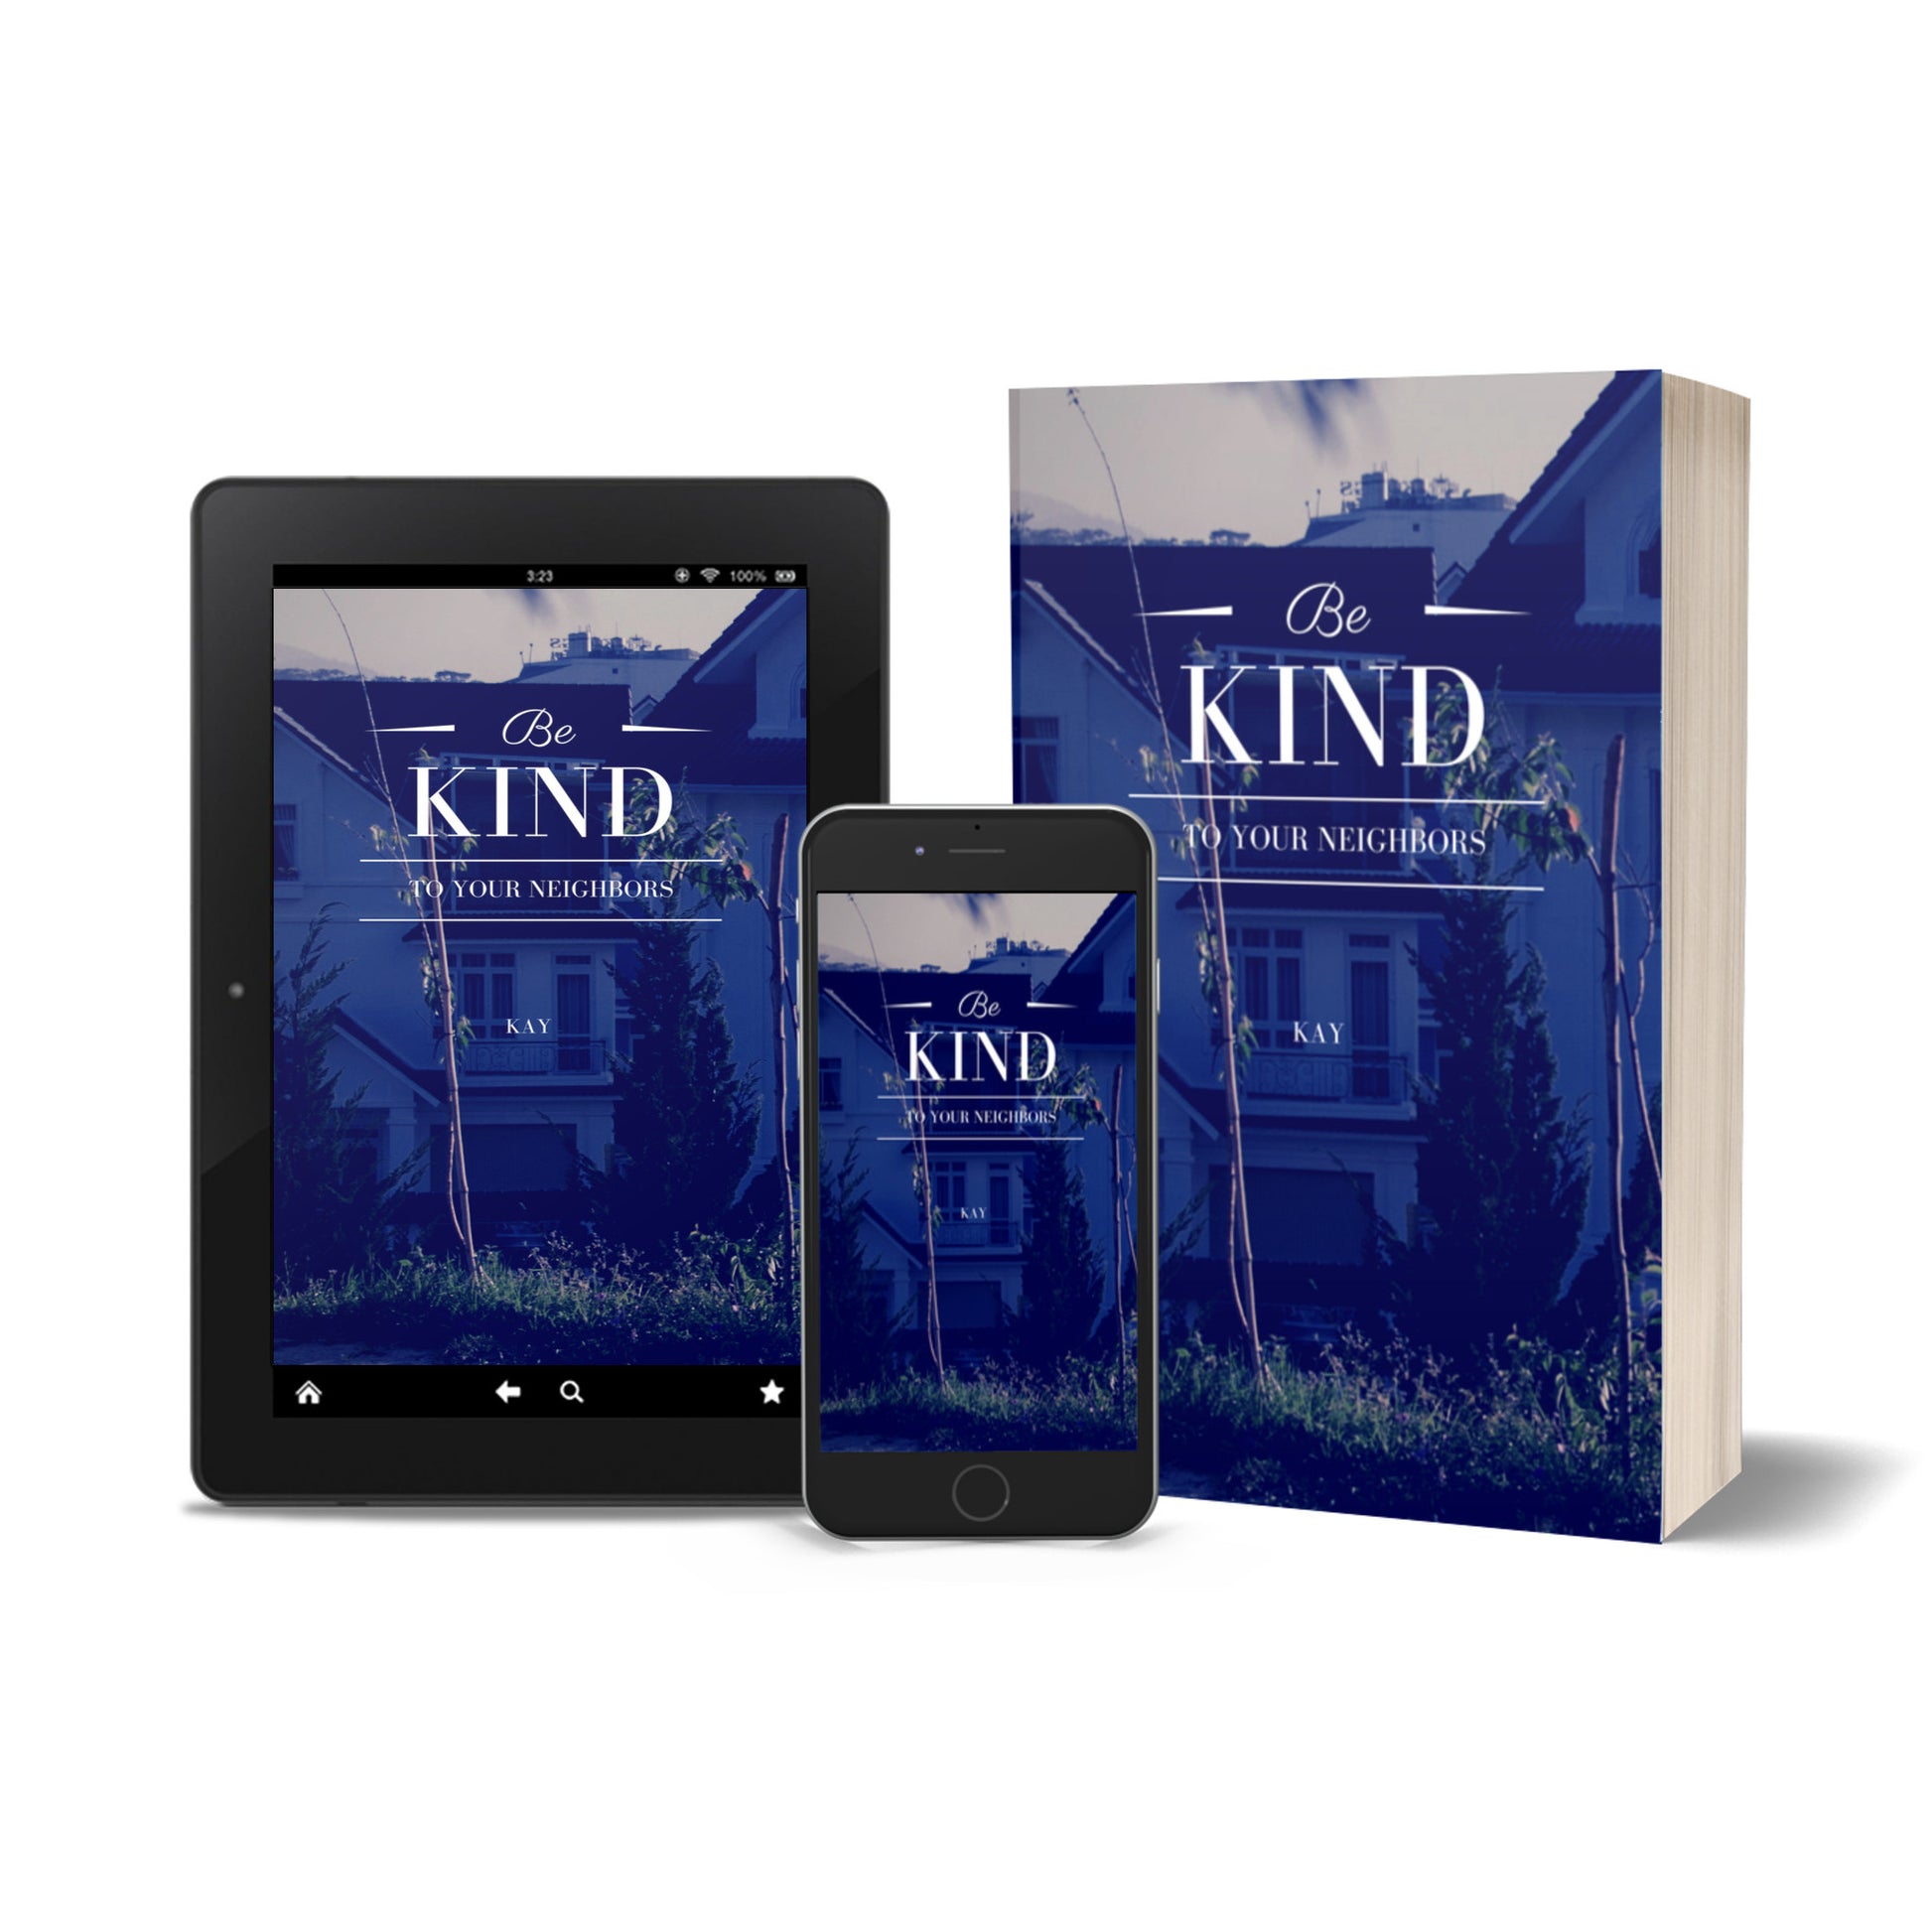 Be Kind to Your Neighors - A Short Story by Kay Digital Download